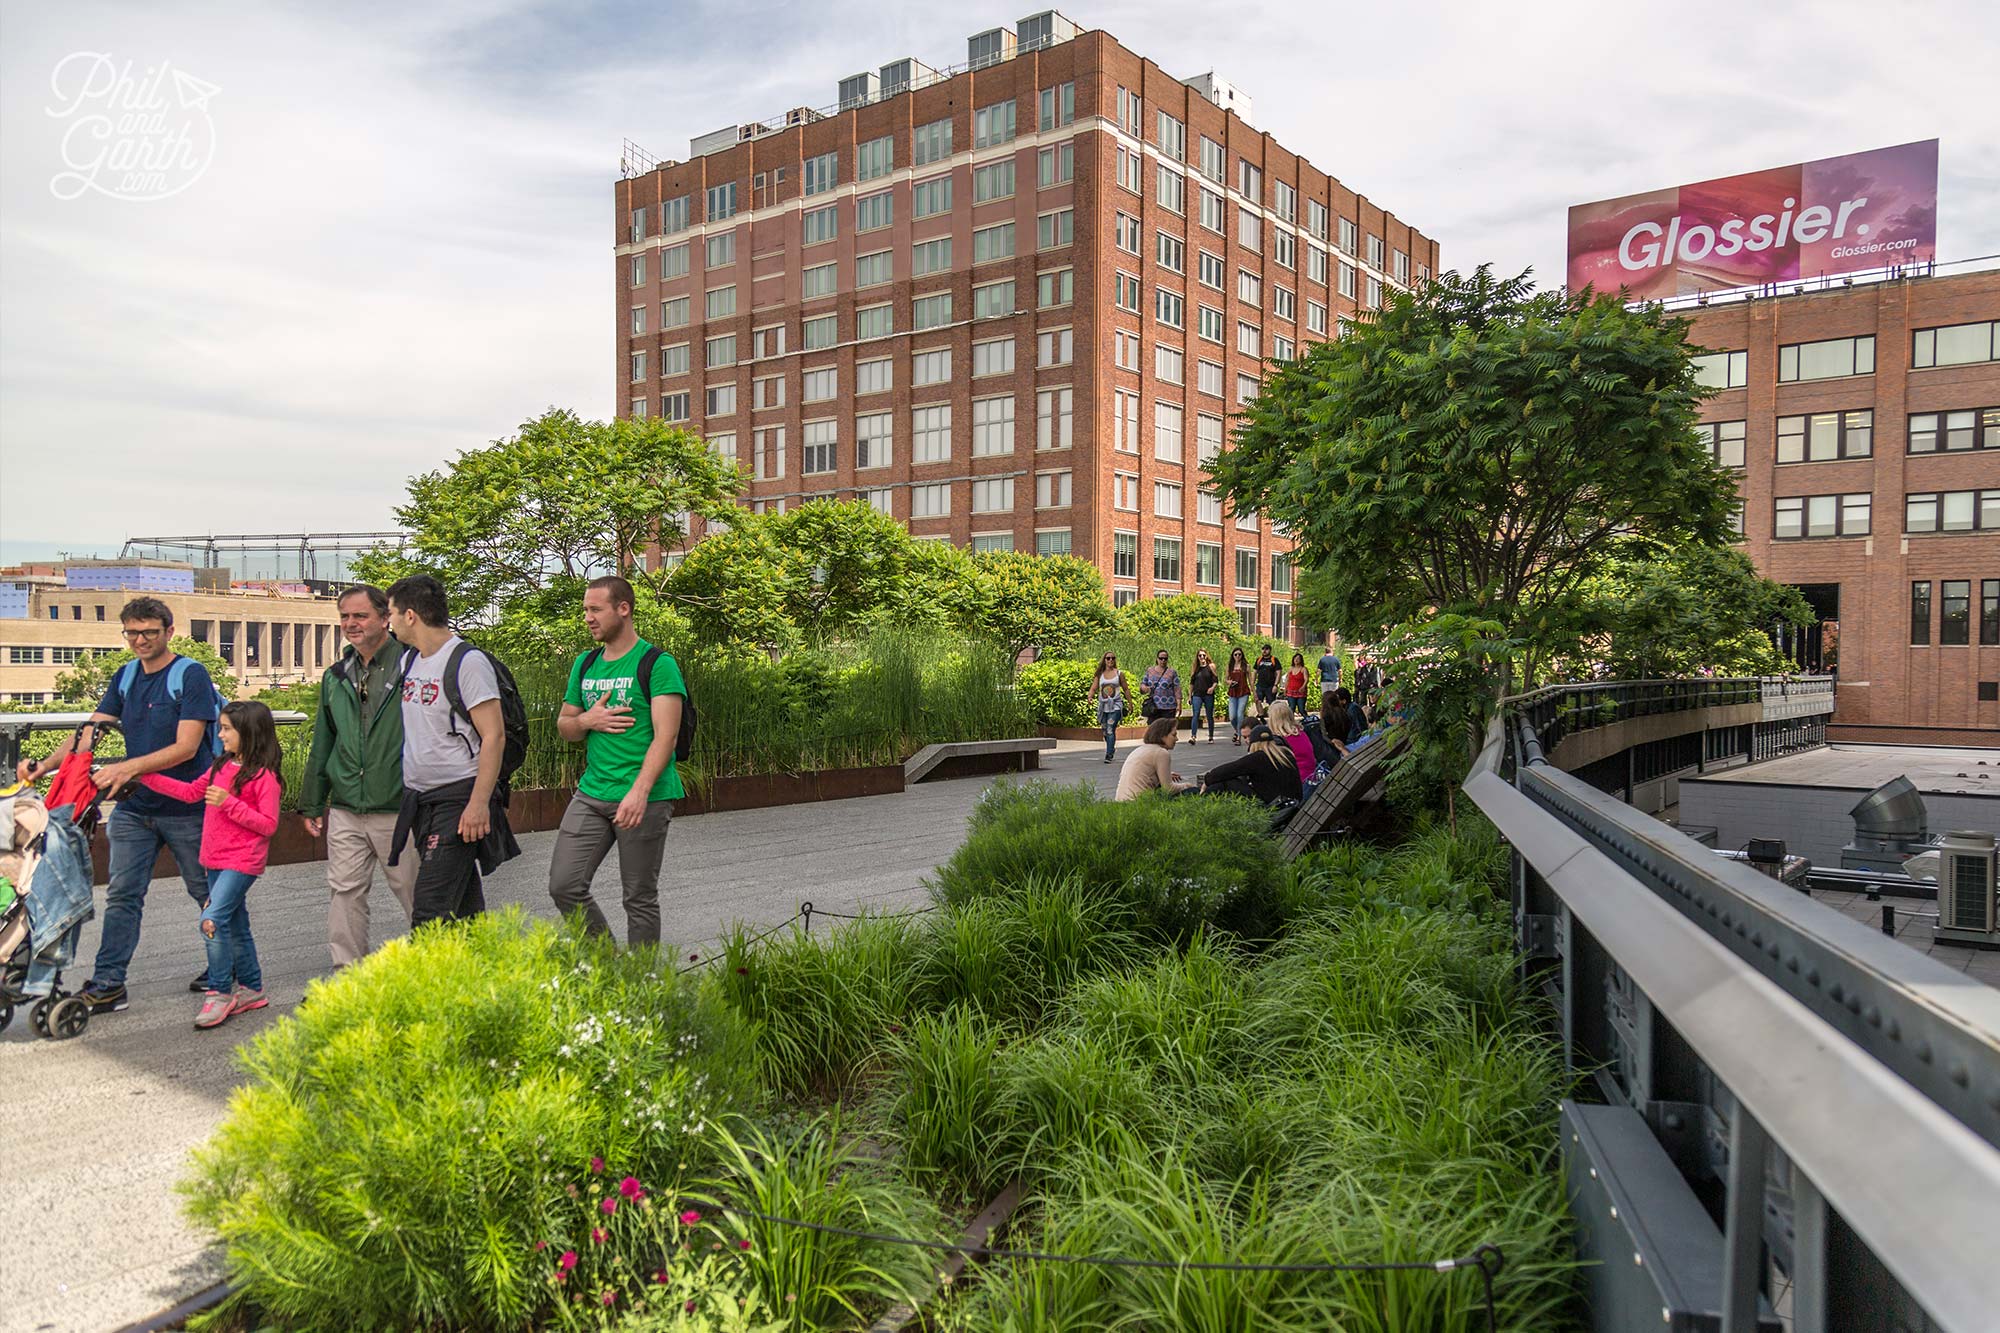 The High Line is an old railway line converted into fabulous gardens. It's 1.45 miles long